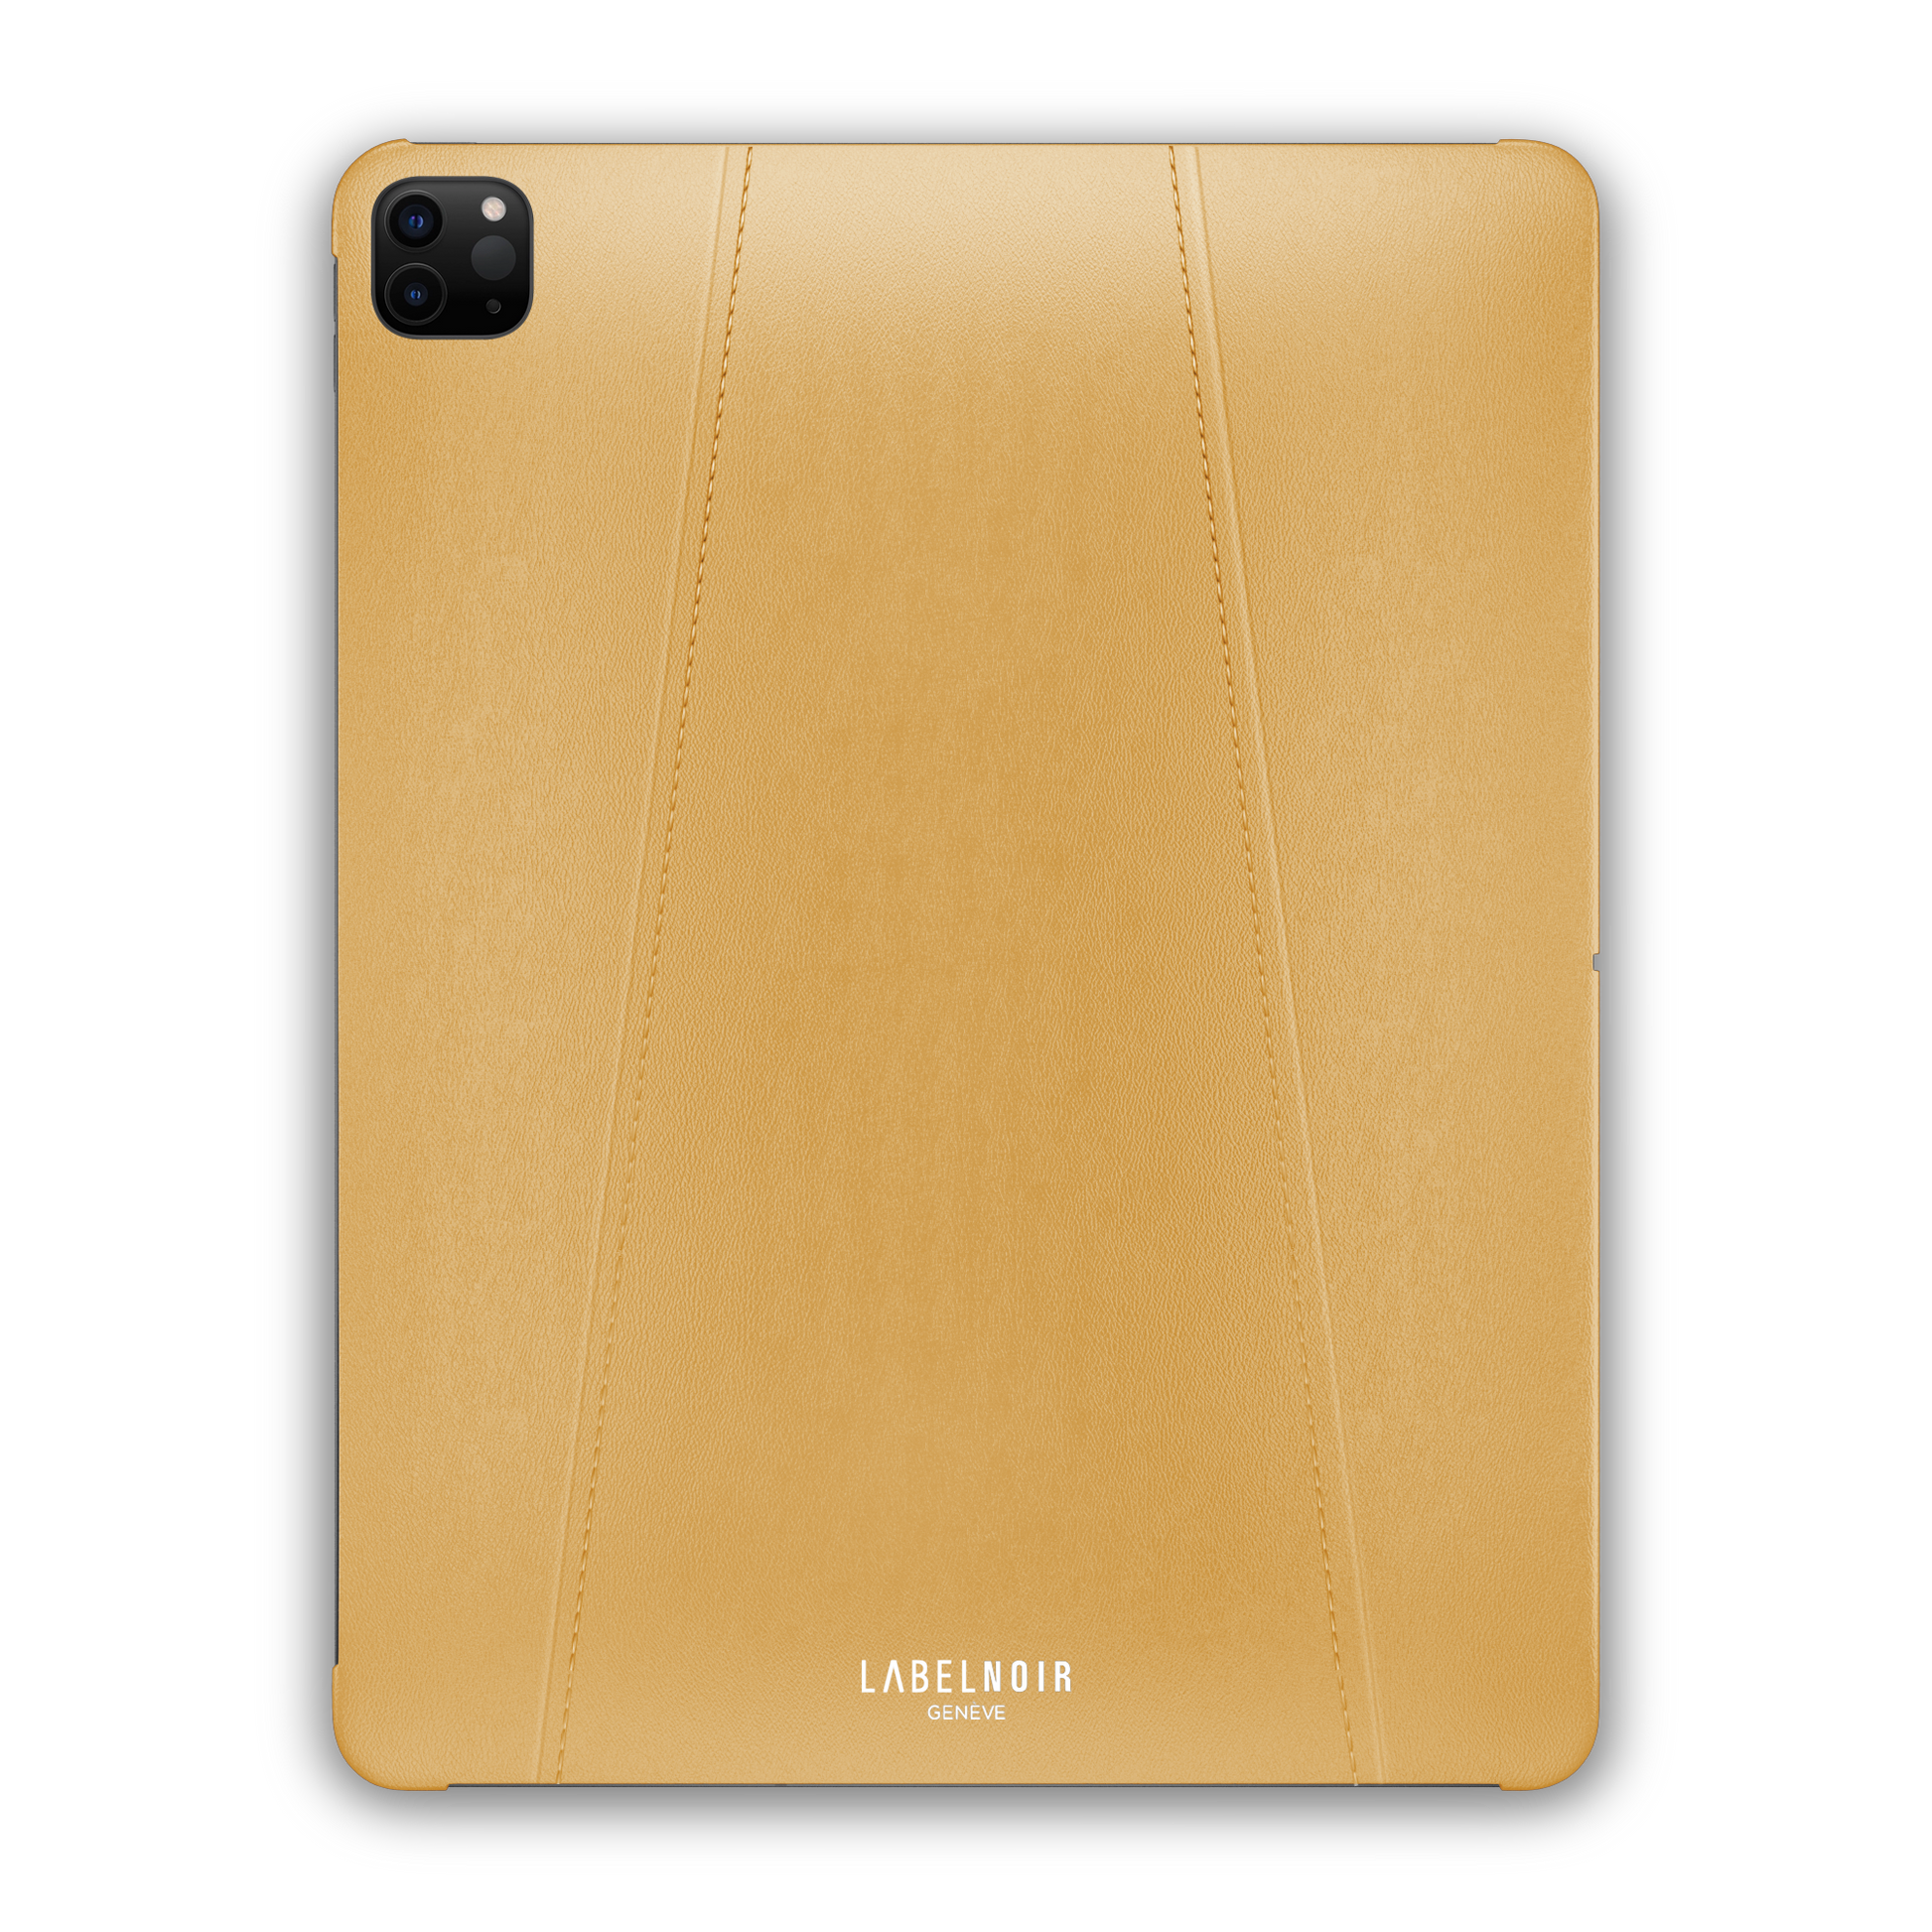 Ipad Pro (2nd-3rd-4th Gen) 11-inch Yellow Leather Case